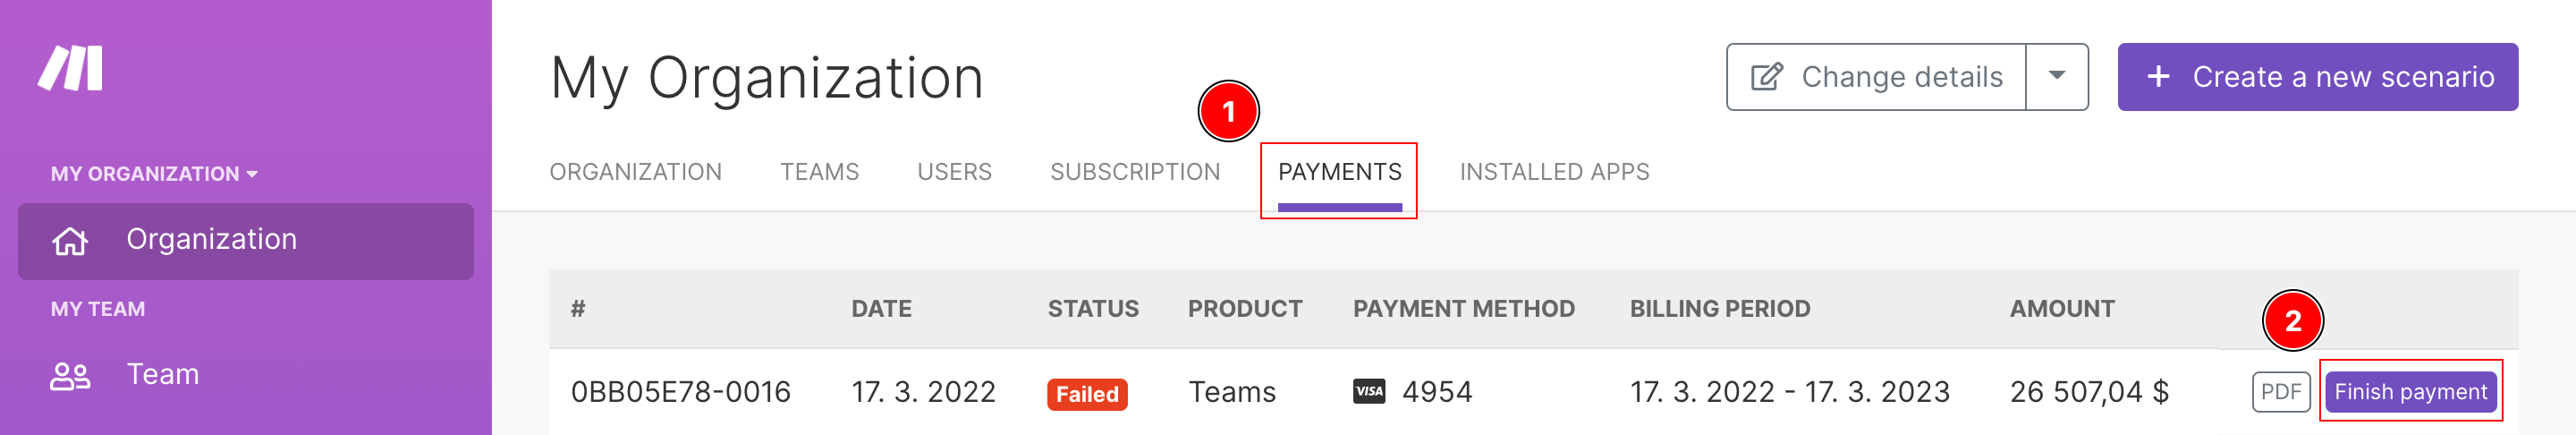 finishPayment.png